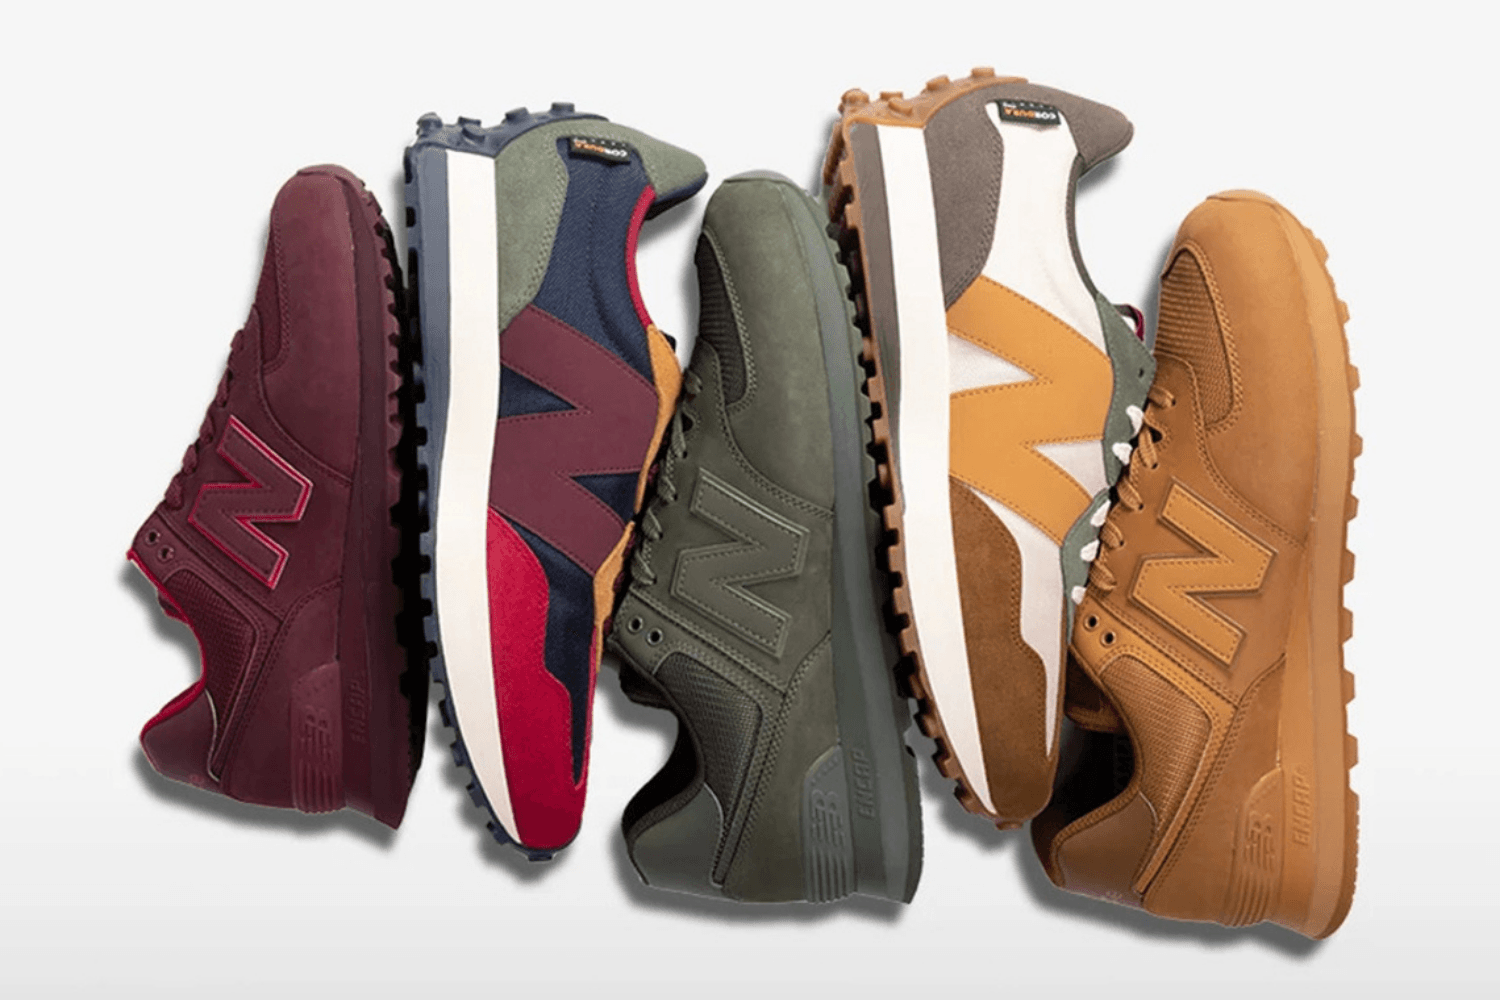 New Balance drops a 574 &#038; 327 'Winterized' pack